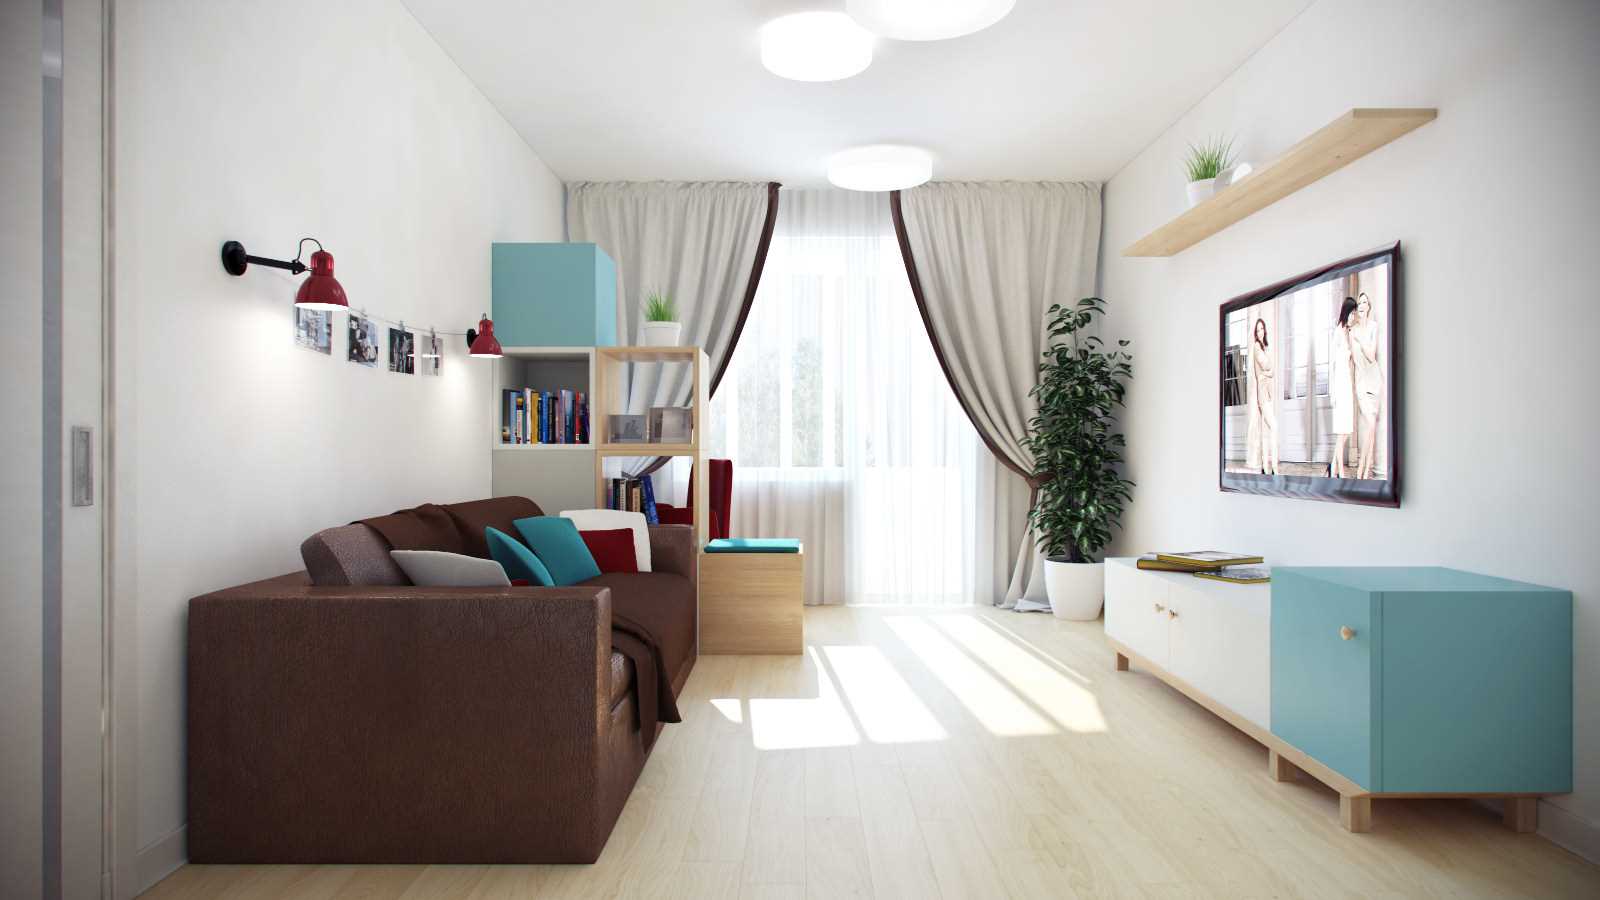 An example of a bright apartment interior of 70 sq.m